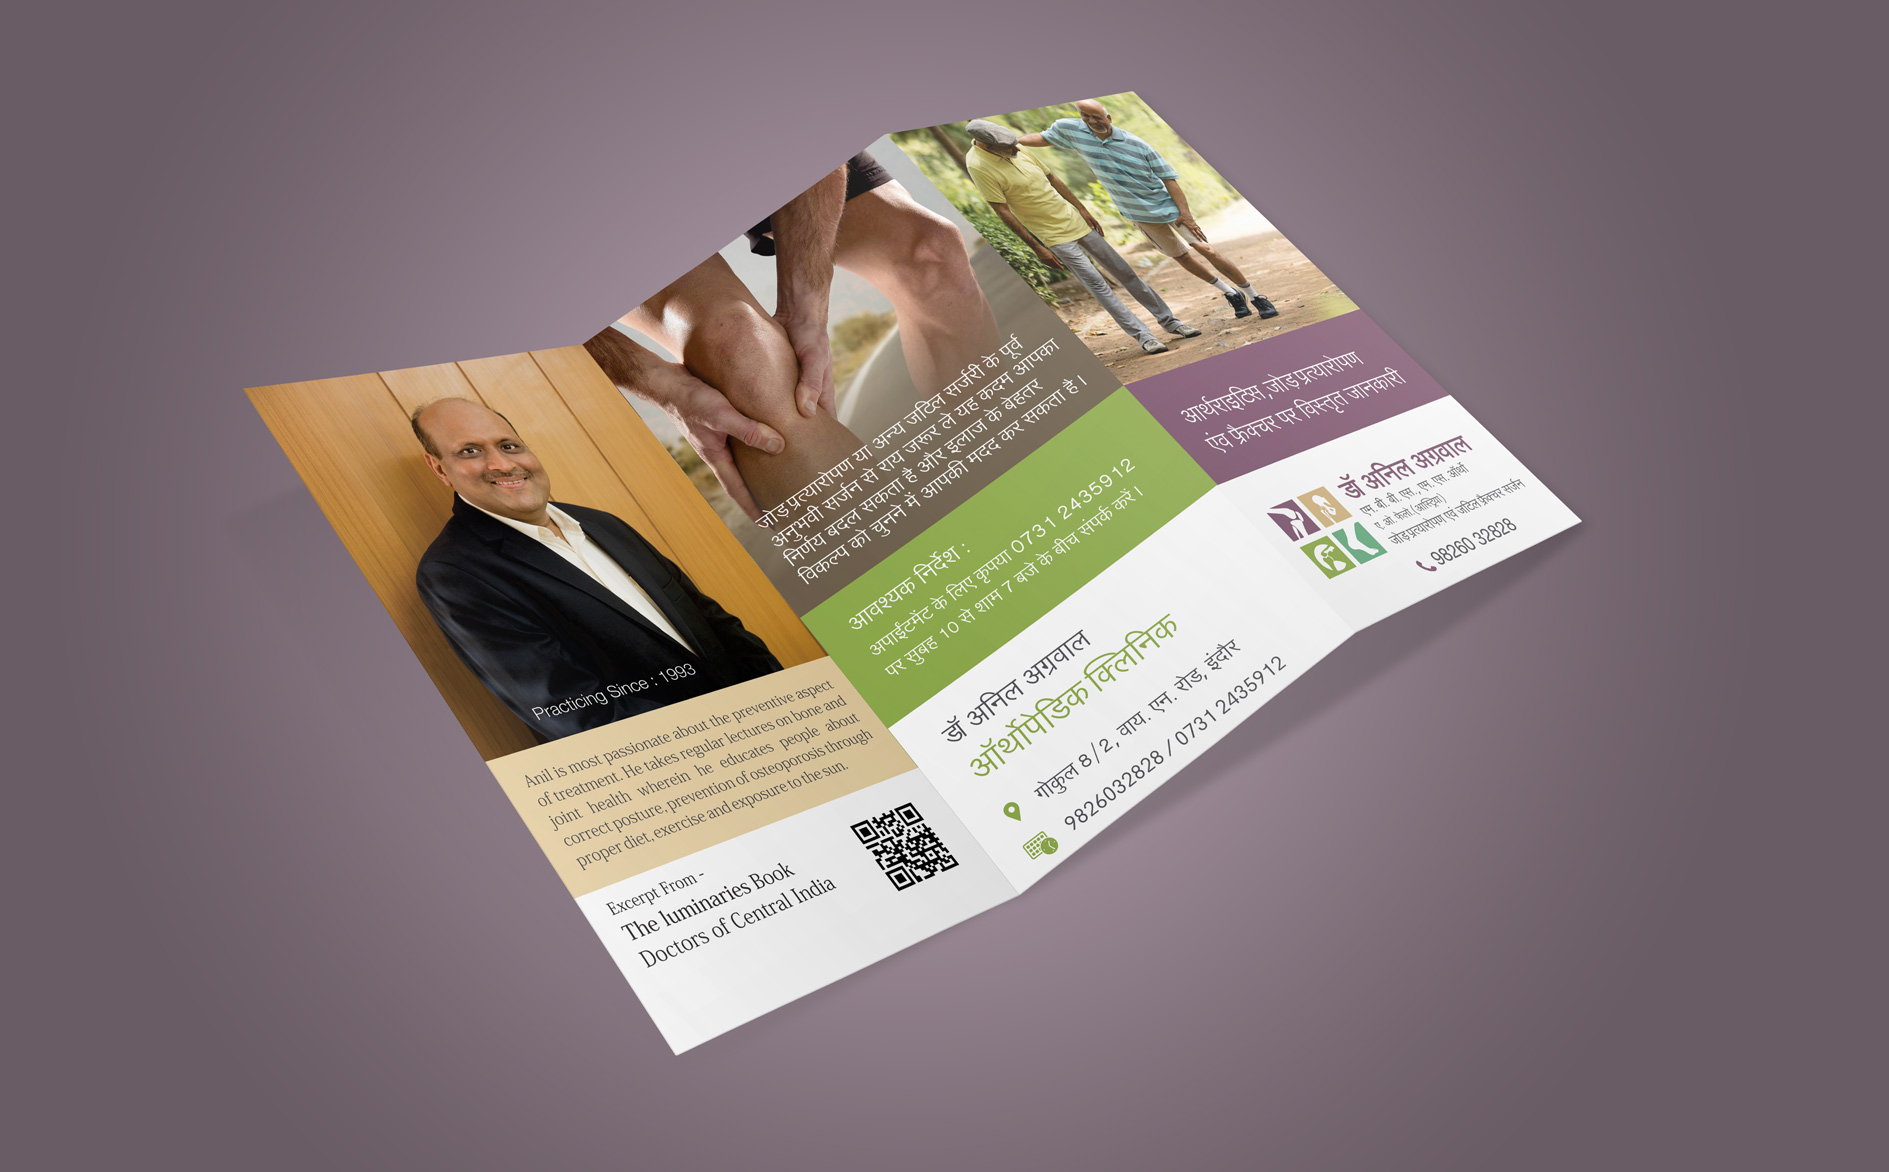 Brochure Design and Printing Indore